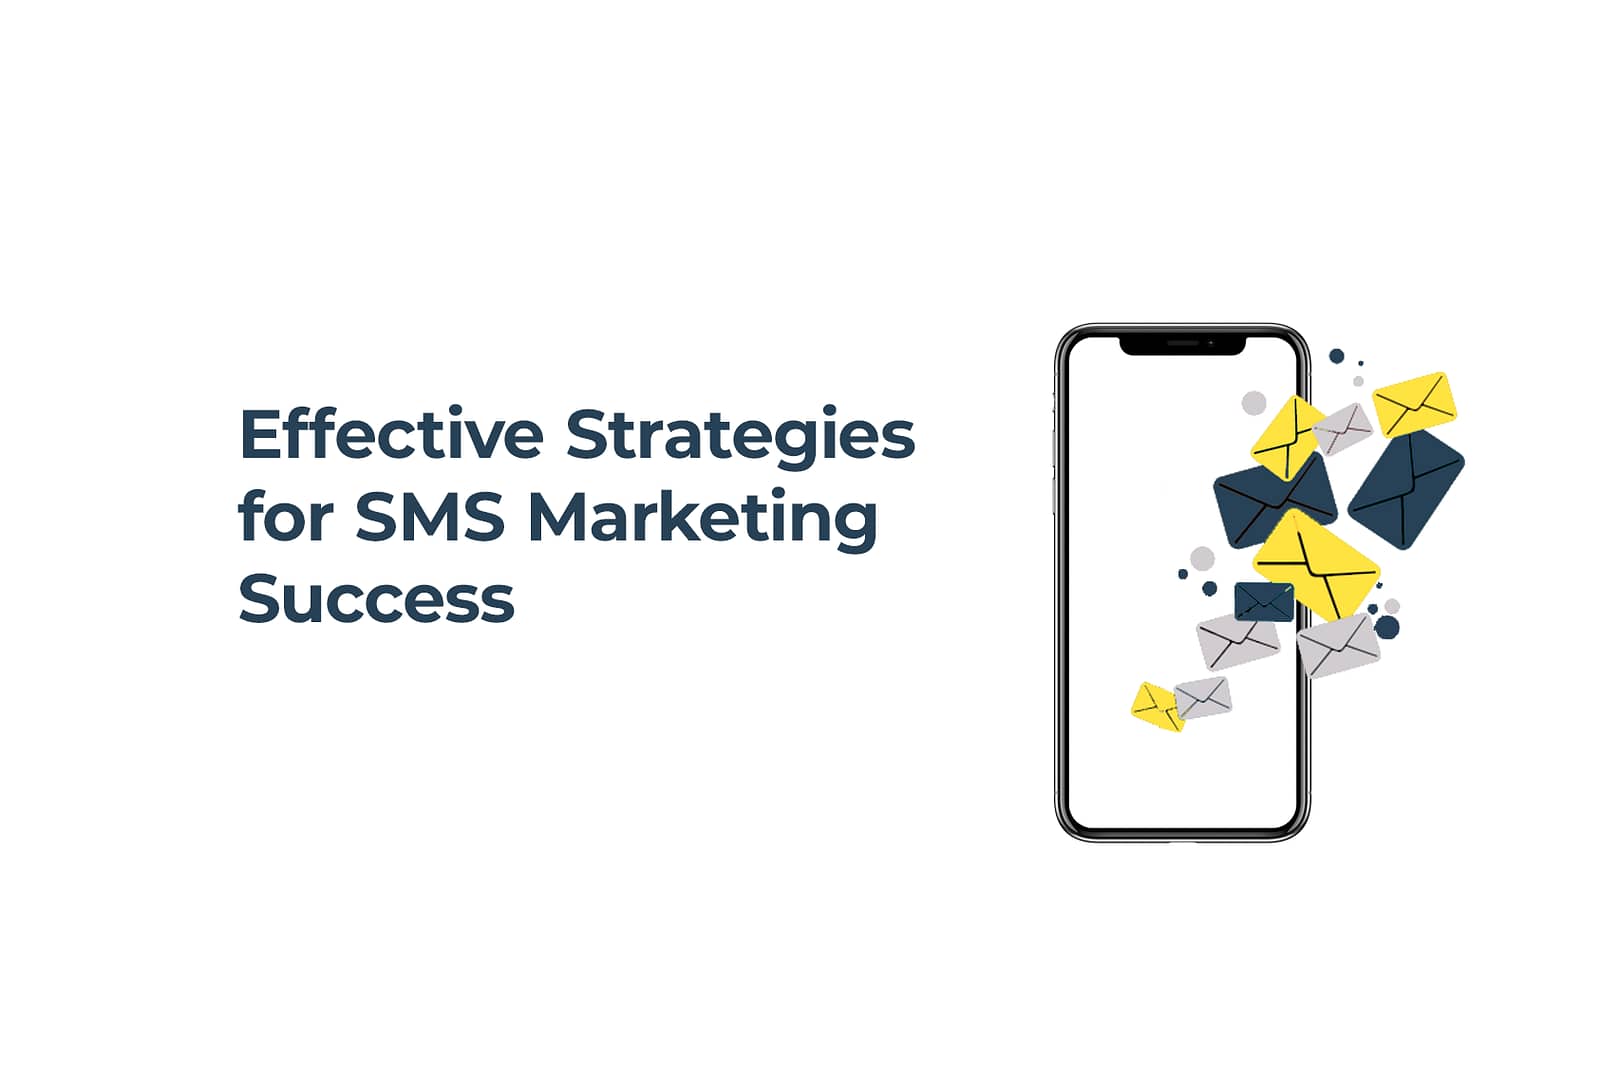 Effective Strategies for SMS marketing success